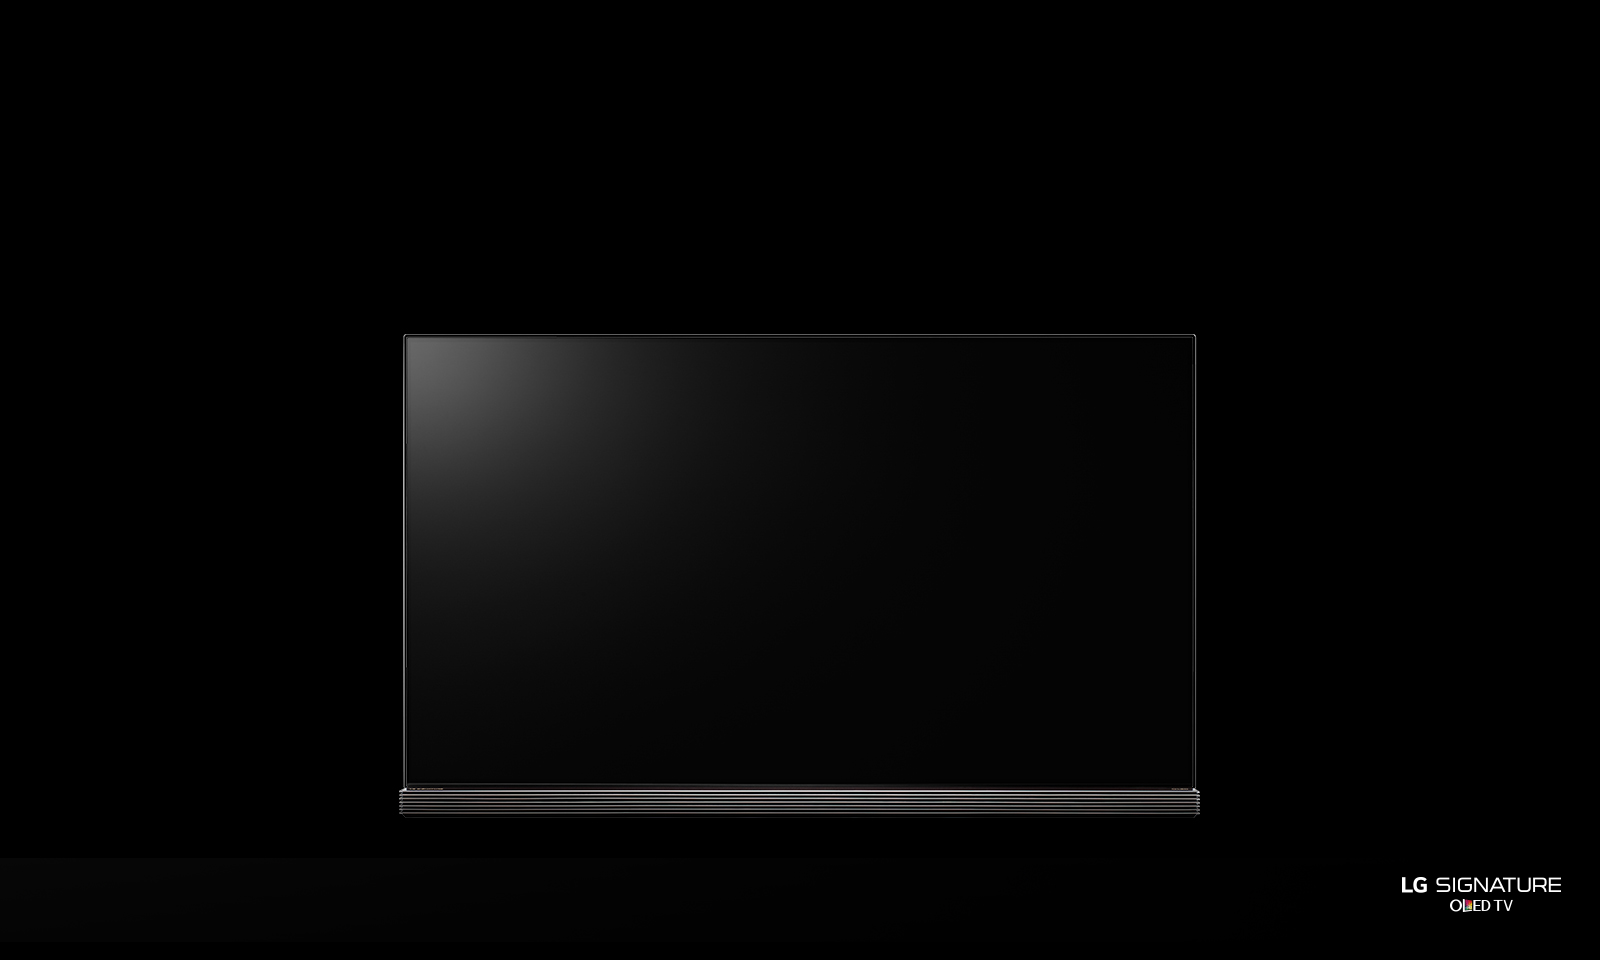 The latest addition to the family of LG OLED TVs, the 77-inch class Signature model.